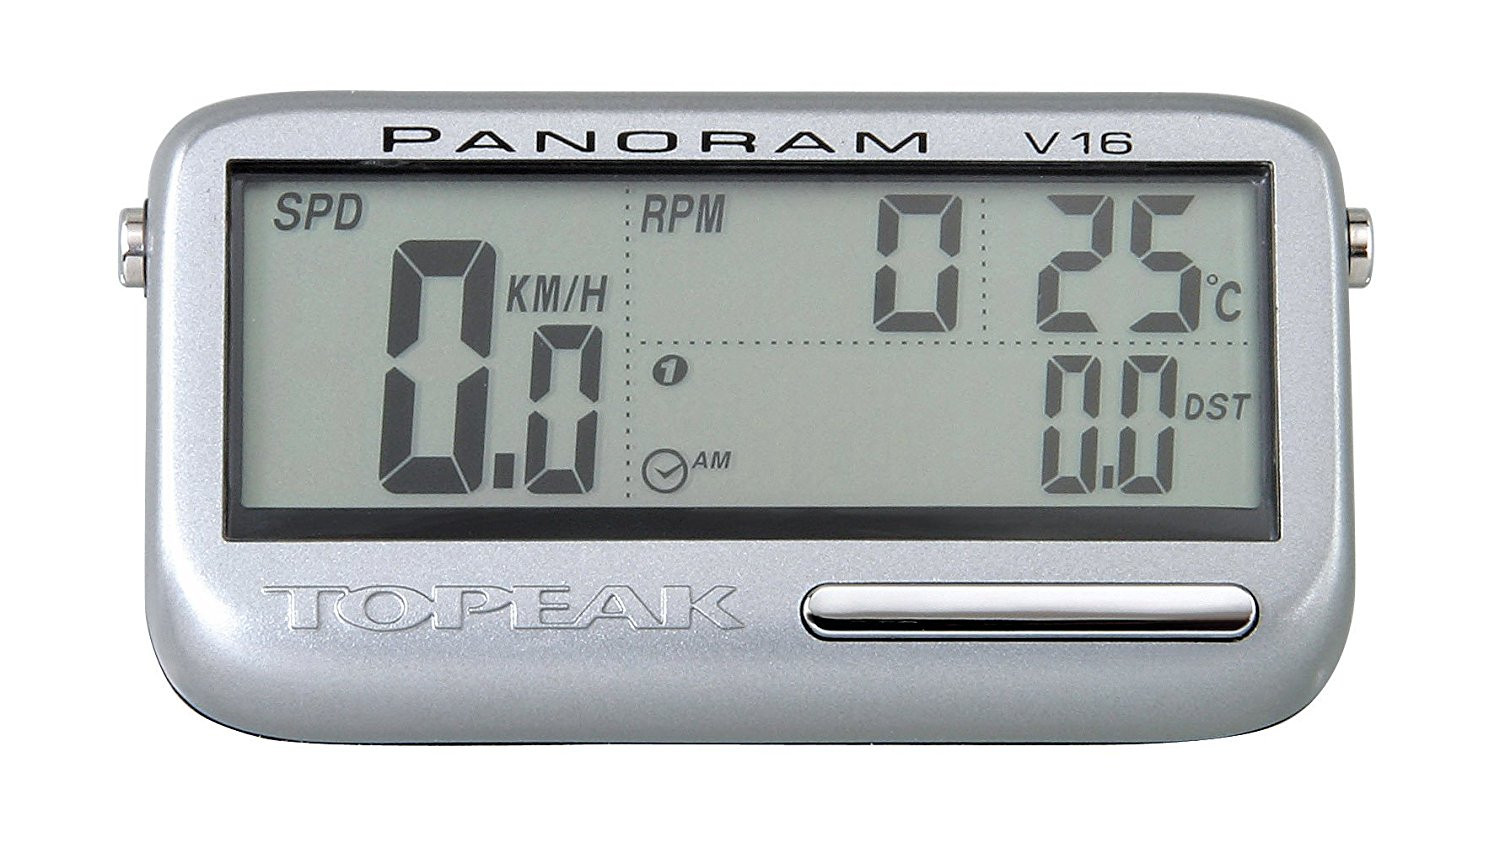 Topeak - Panoram V16 - 16 Function Cycle Computer - Computer